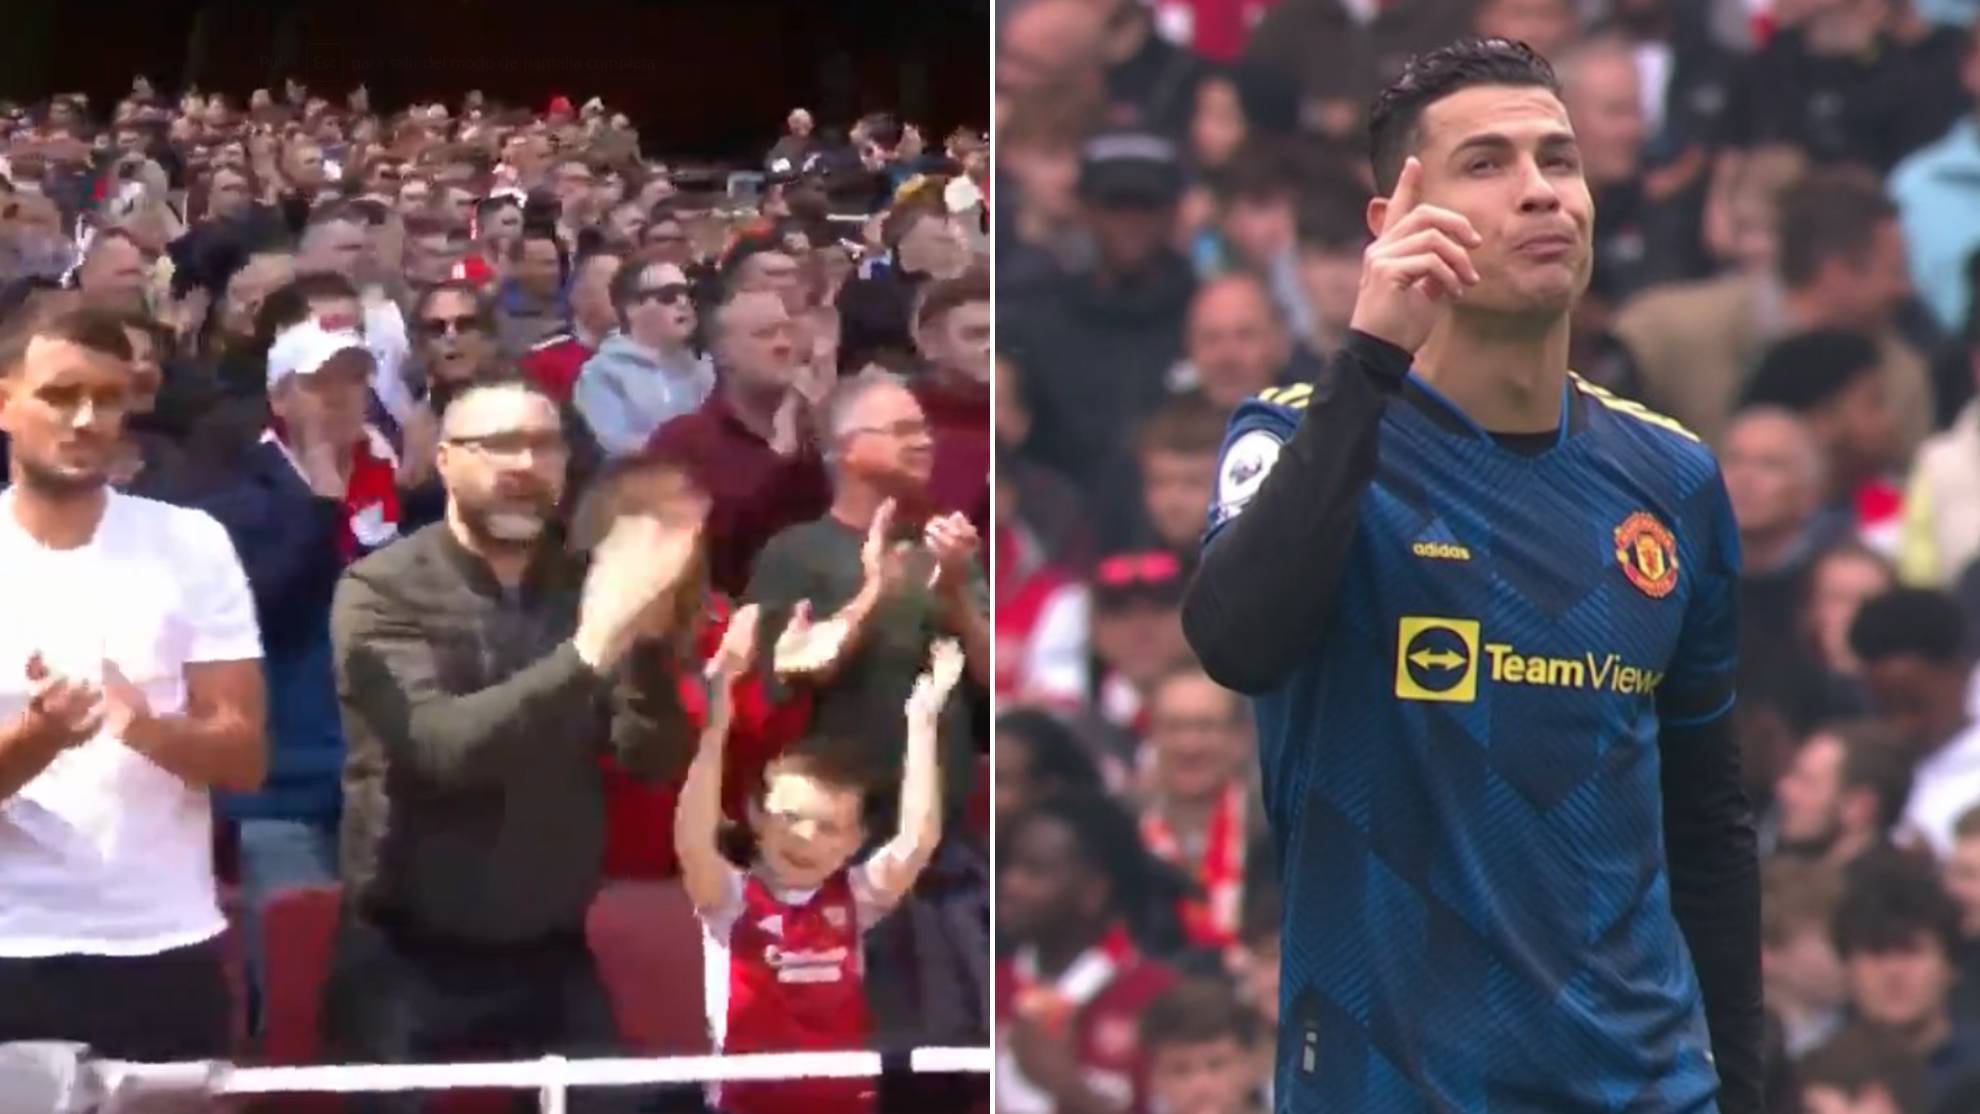 Arsenal give standing ovation to Cristiano Ronaldo in tribute to son's death